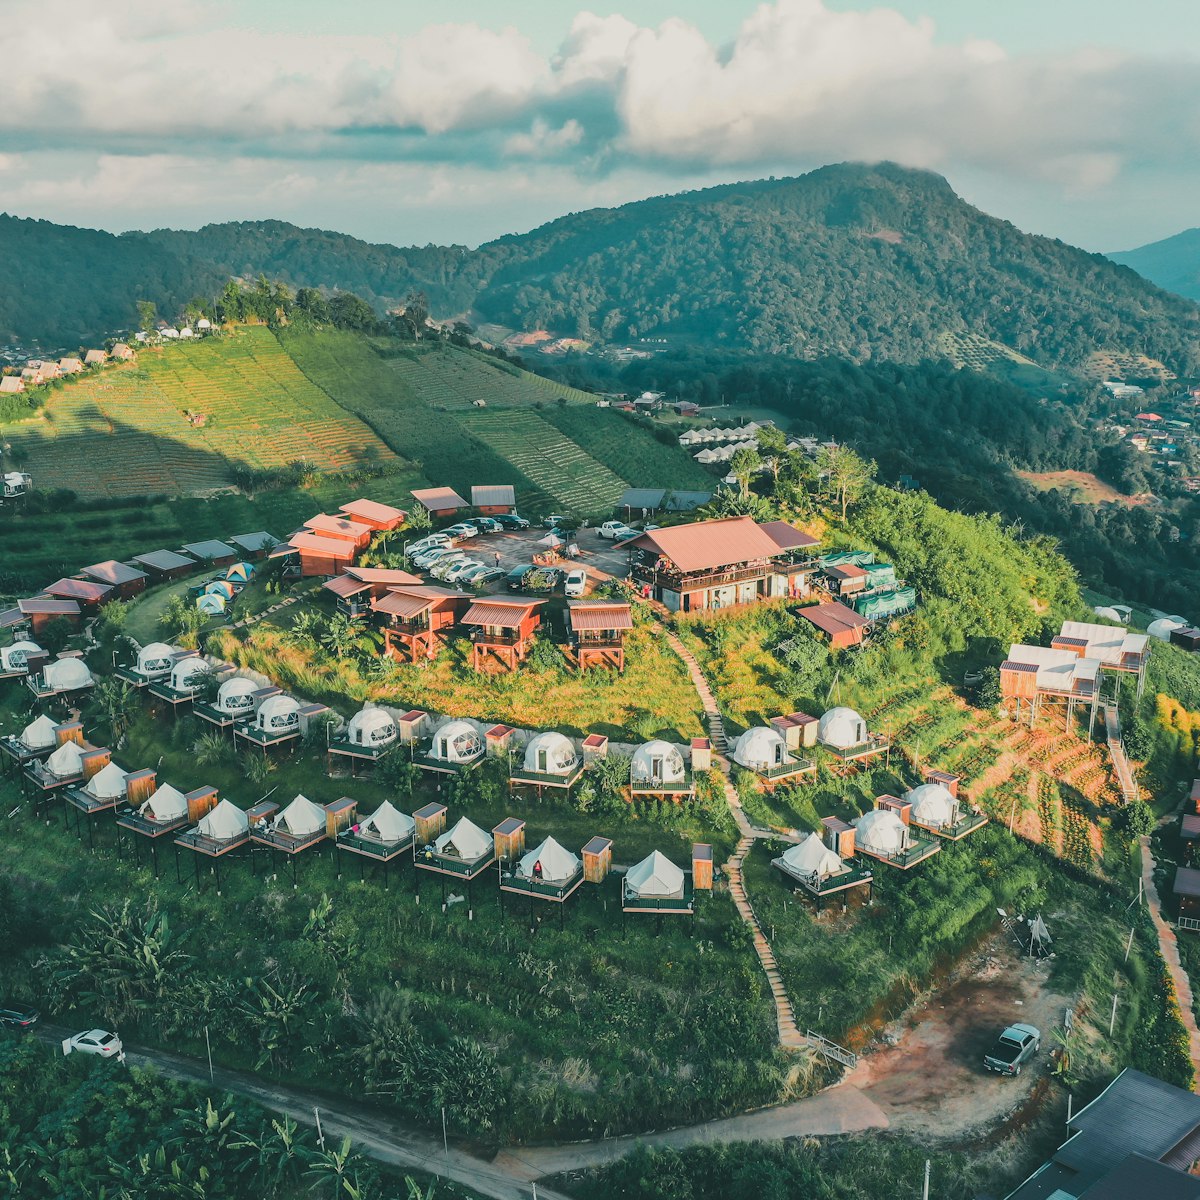 Aerial view of camping grounds and tents on Doi Mon Cham mountain in Mae Rim, Chiang Mai province, Thailand.